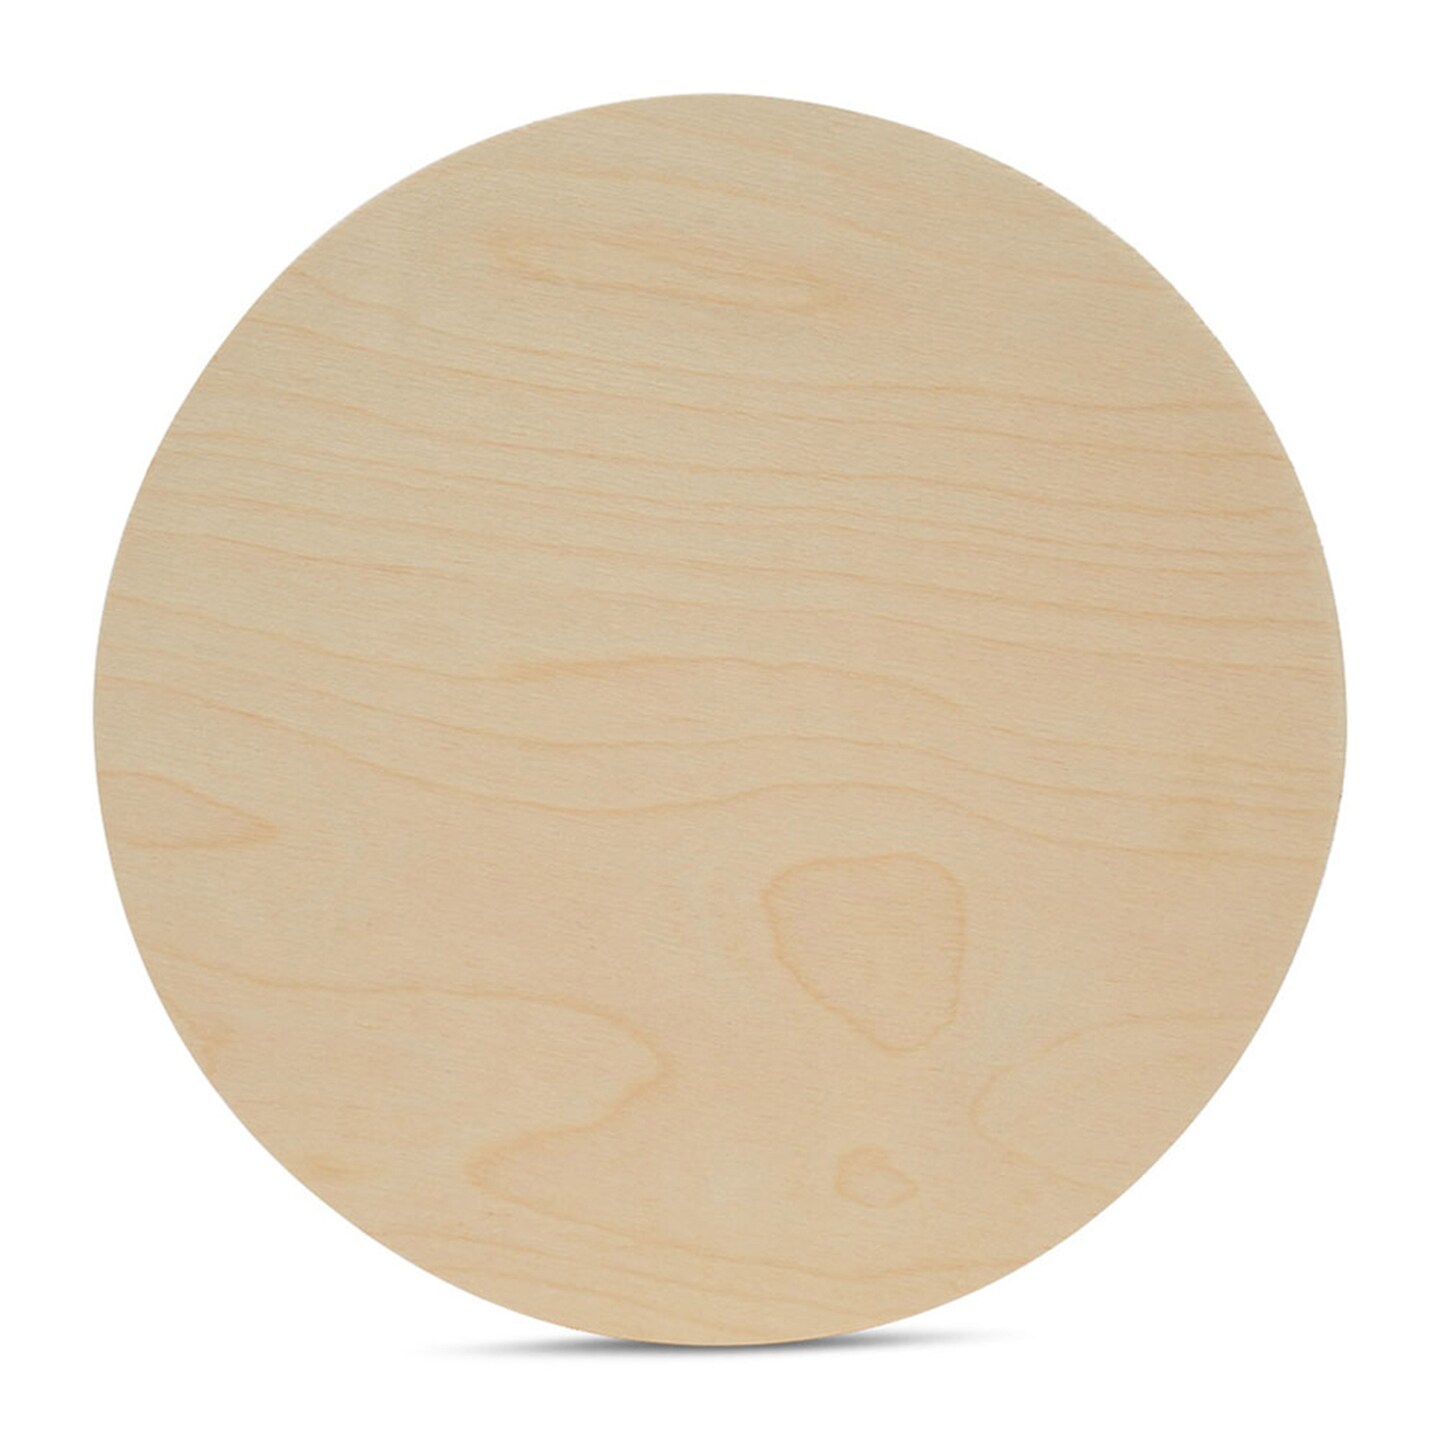 Wood Circles 12 inch, 1/4 Inch Thick, Birch Plywood Discs, Pack of 3  Unfinished Wood Circles for Crafts, Wood Rounds by Woodpeckers